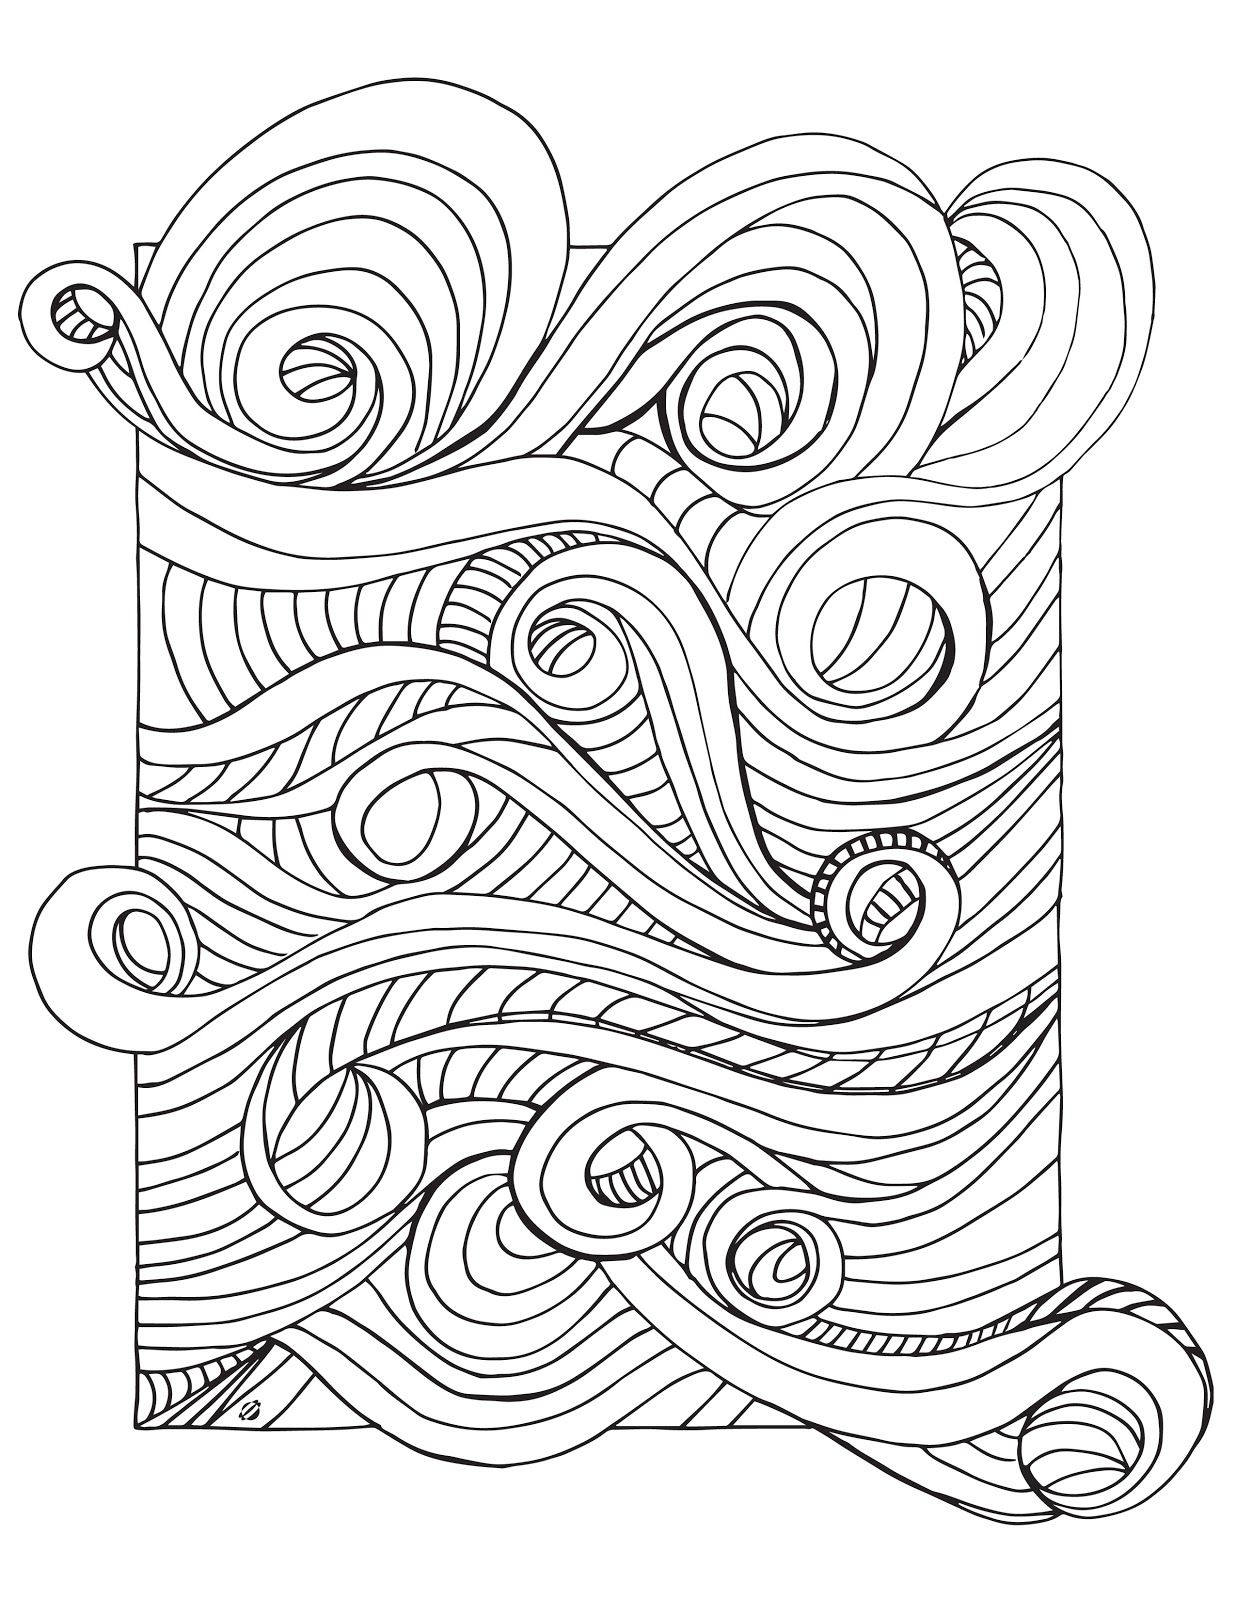 Waves Coloring Page at GetColorings.com | Free printable 